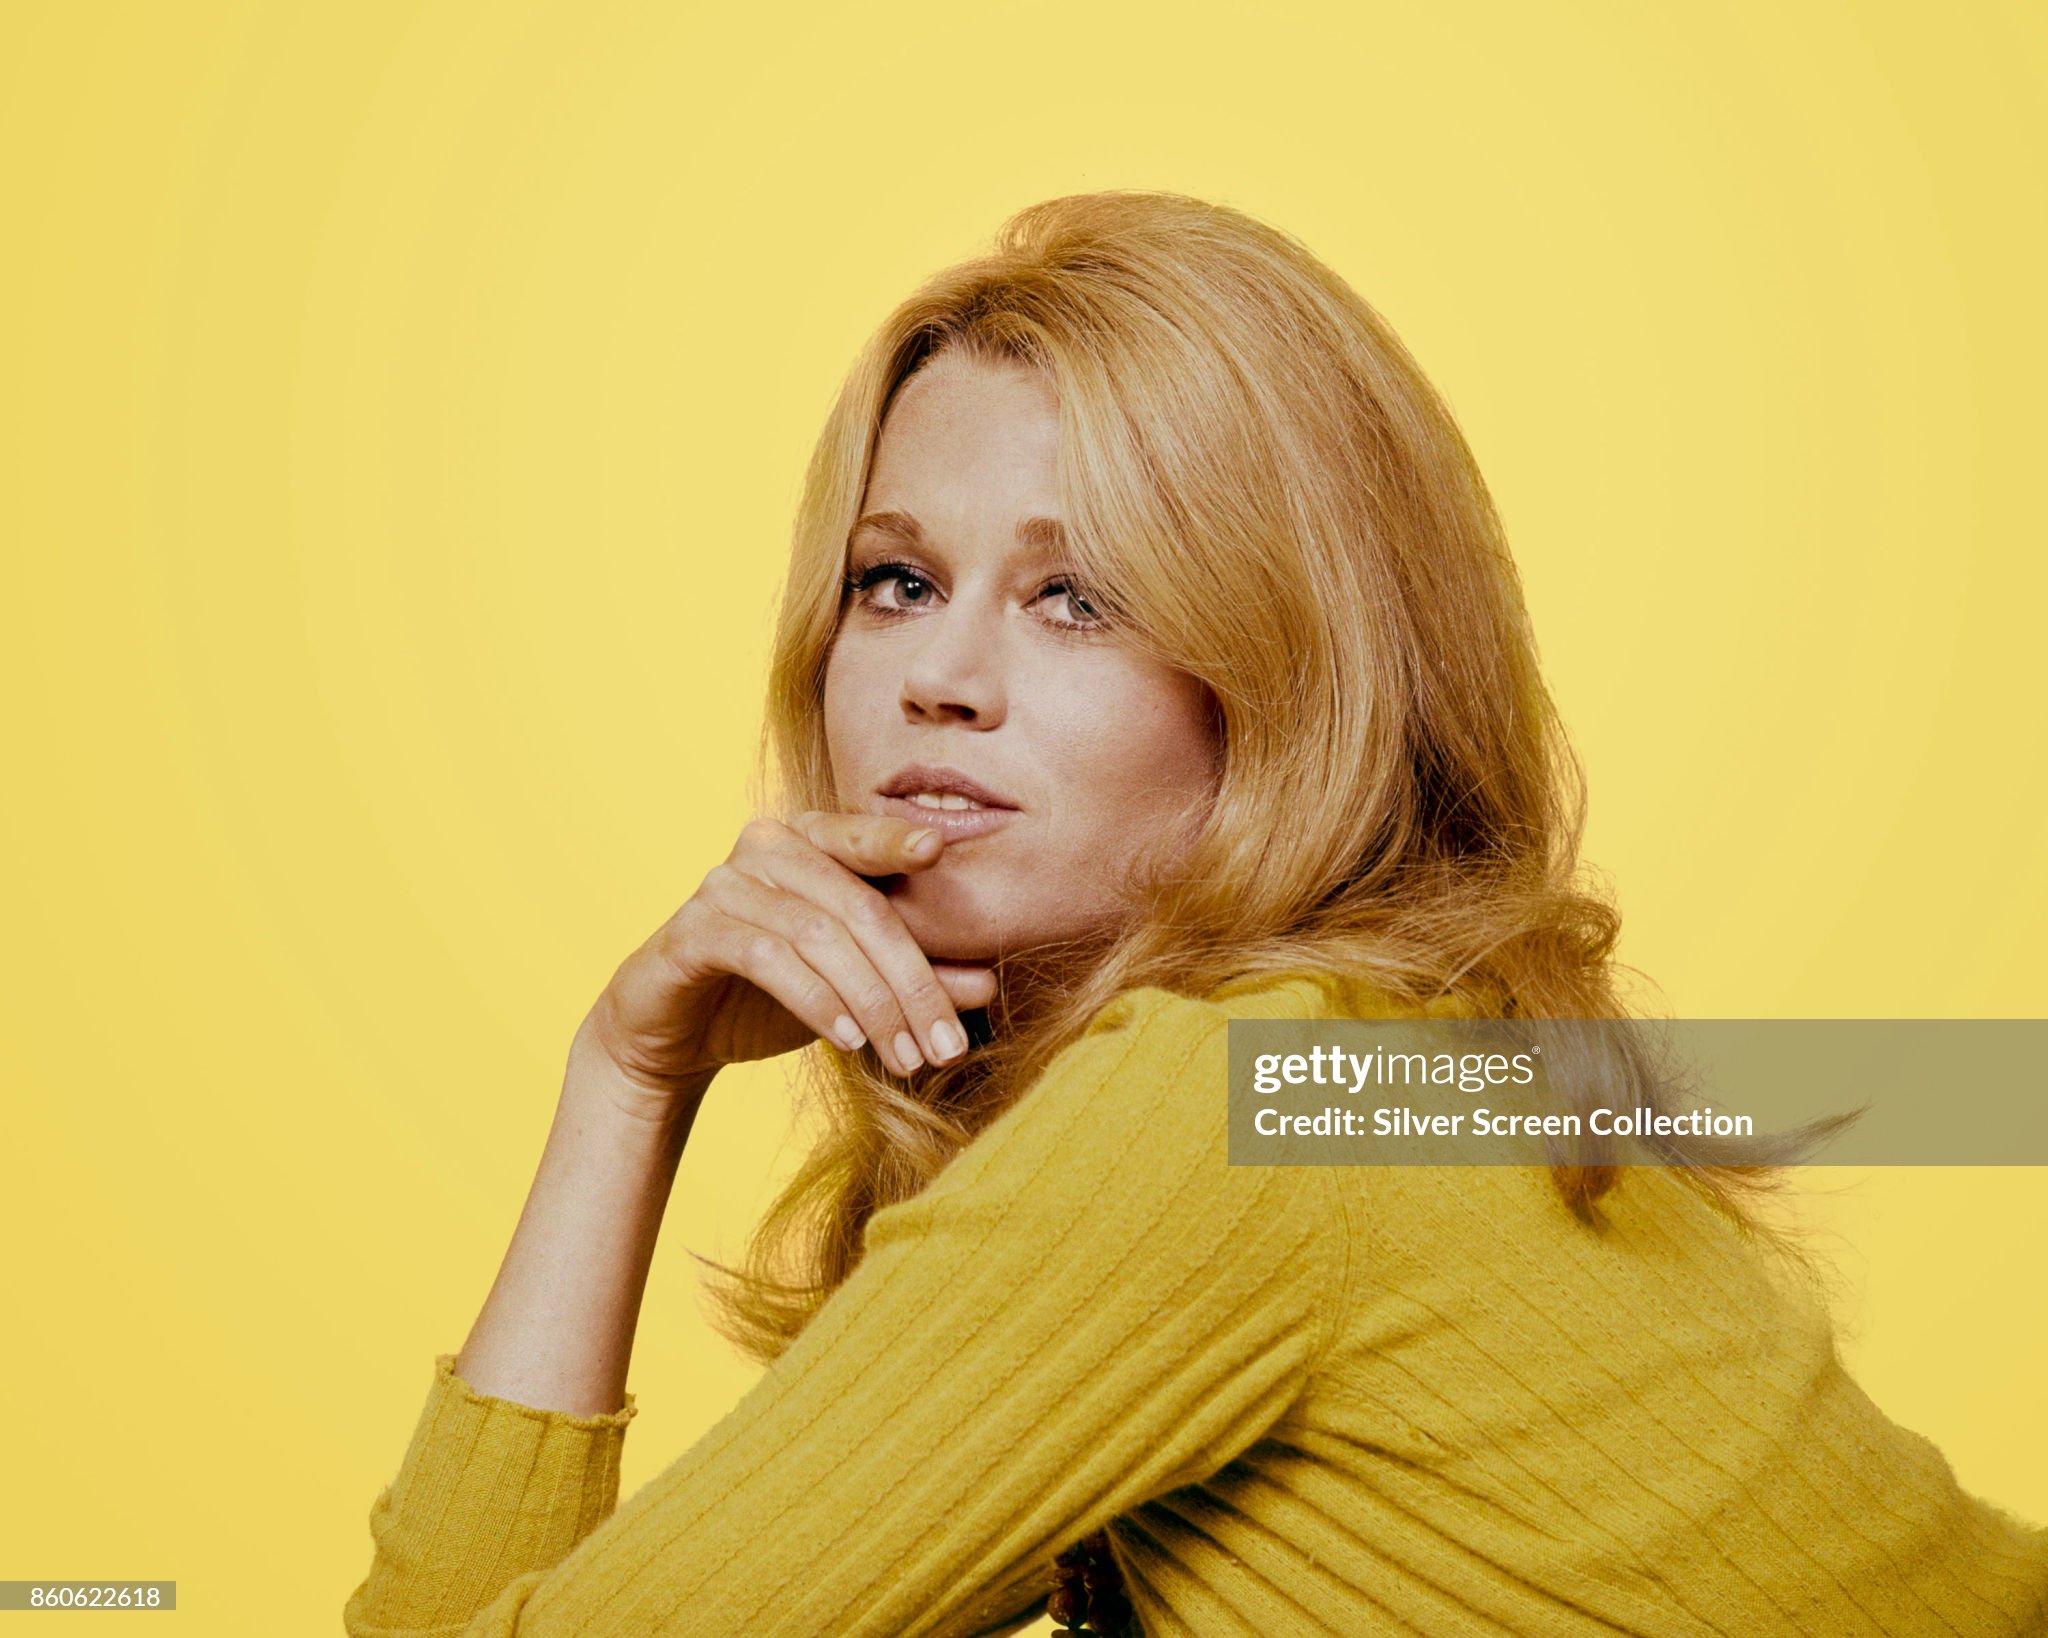 Portrait of American actress Jane Fonda, her hand on her chin, as she poses in a yellow sweater against a yellow background, 1960s. 